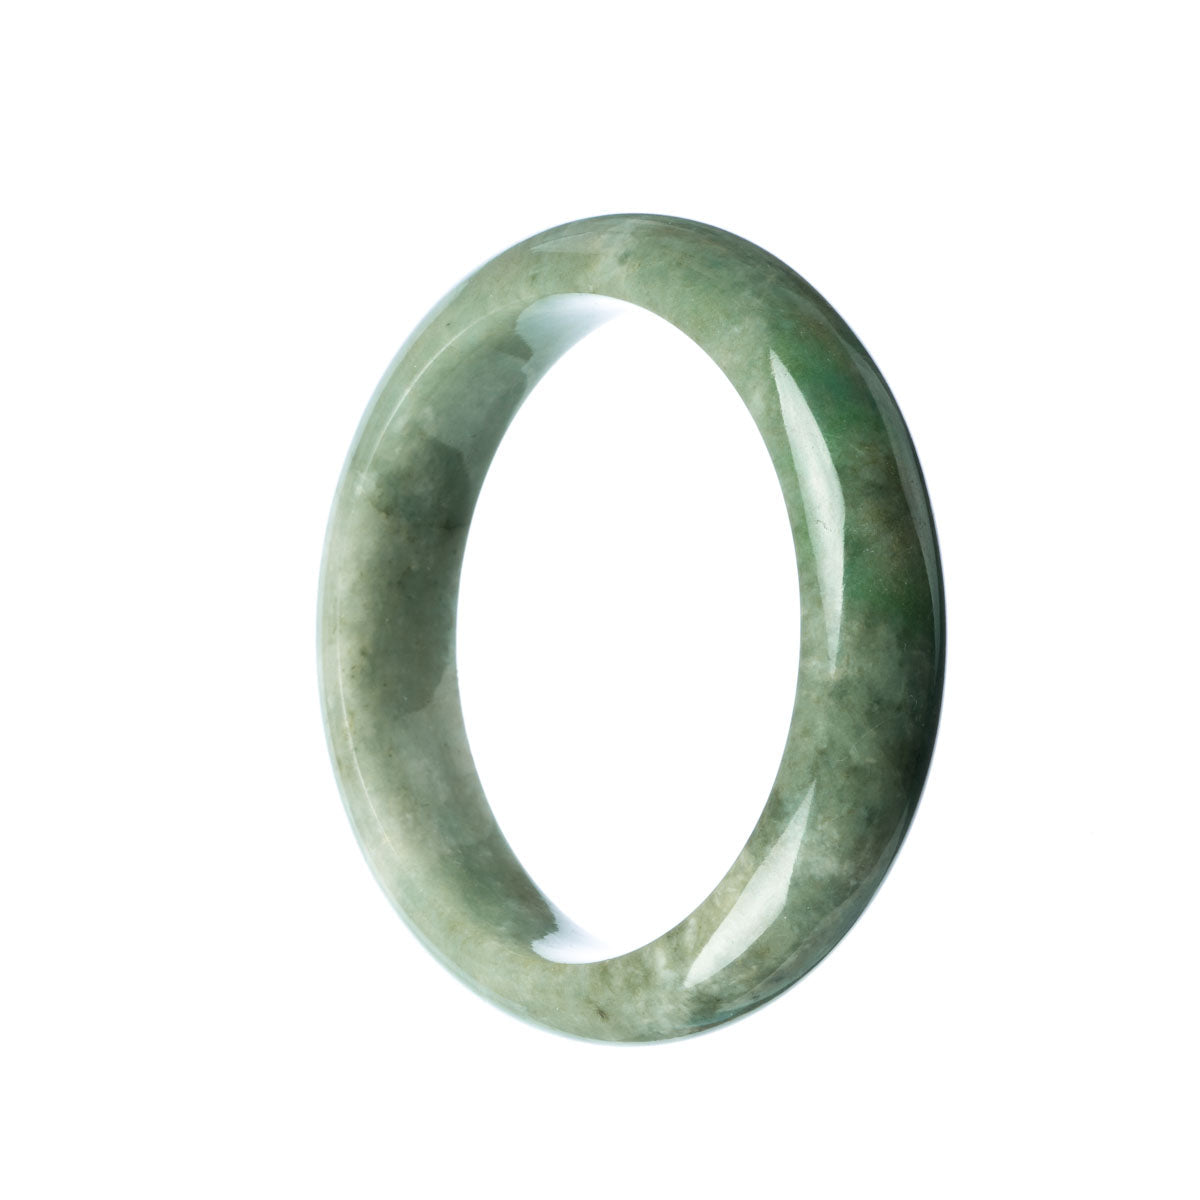 An elegant half moon-shaped Type A Green Traditional Jade Bangle, measuring 58mm in size, offered by MAYS GEMS.